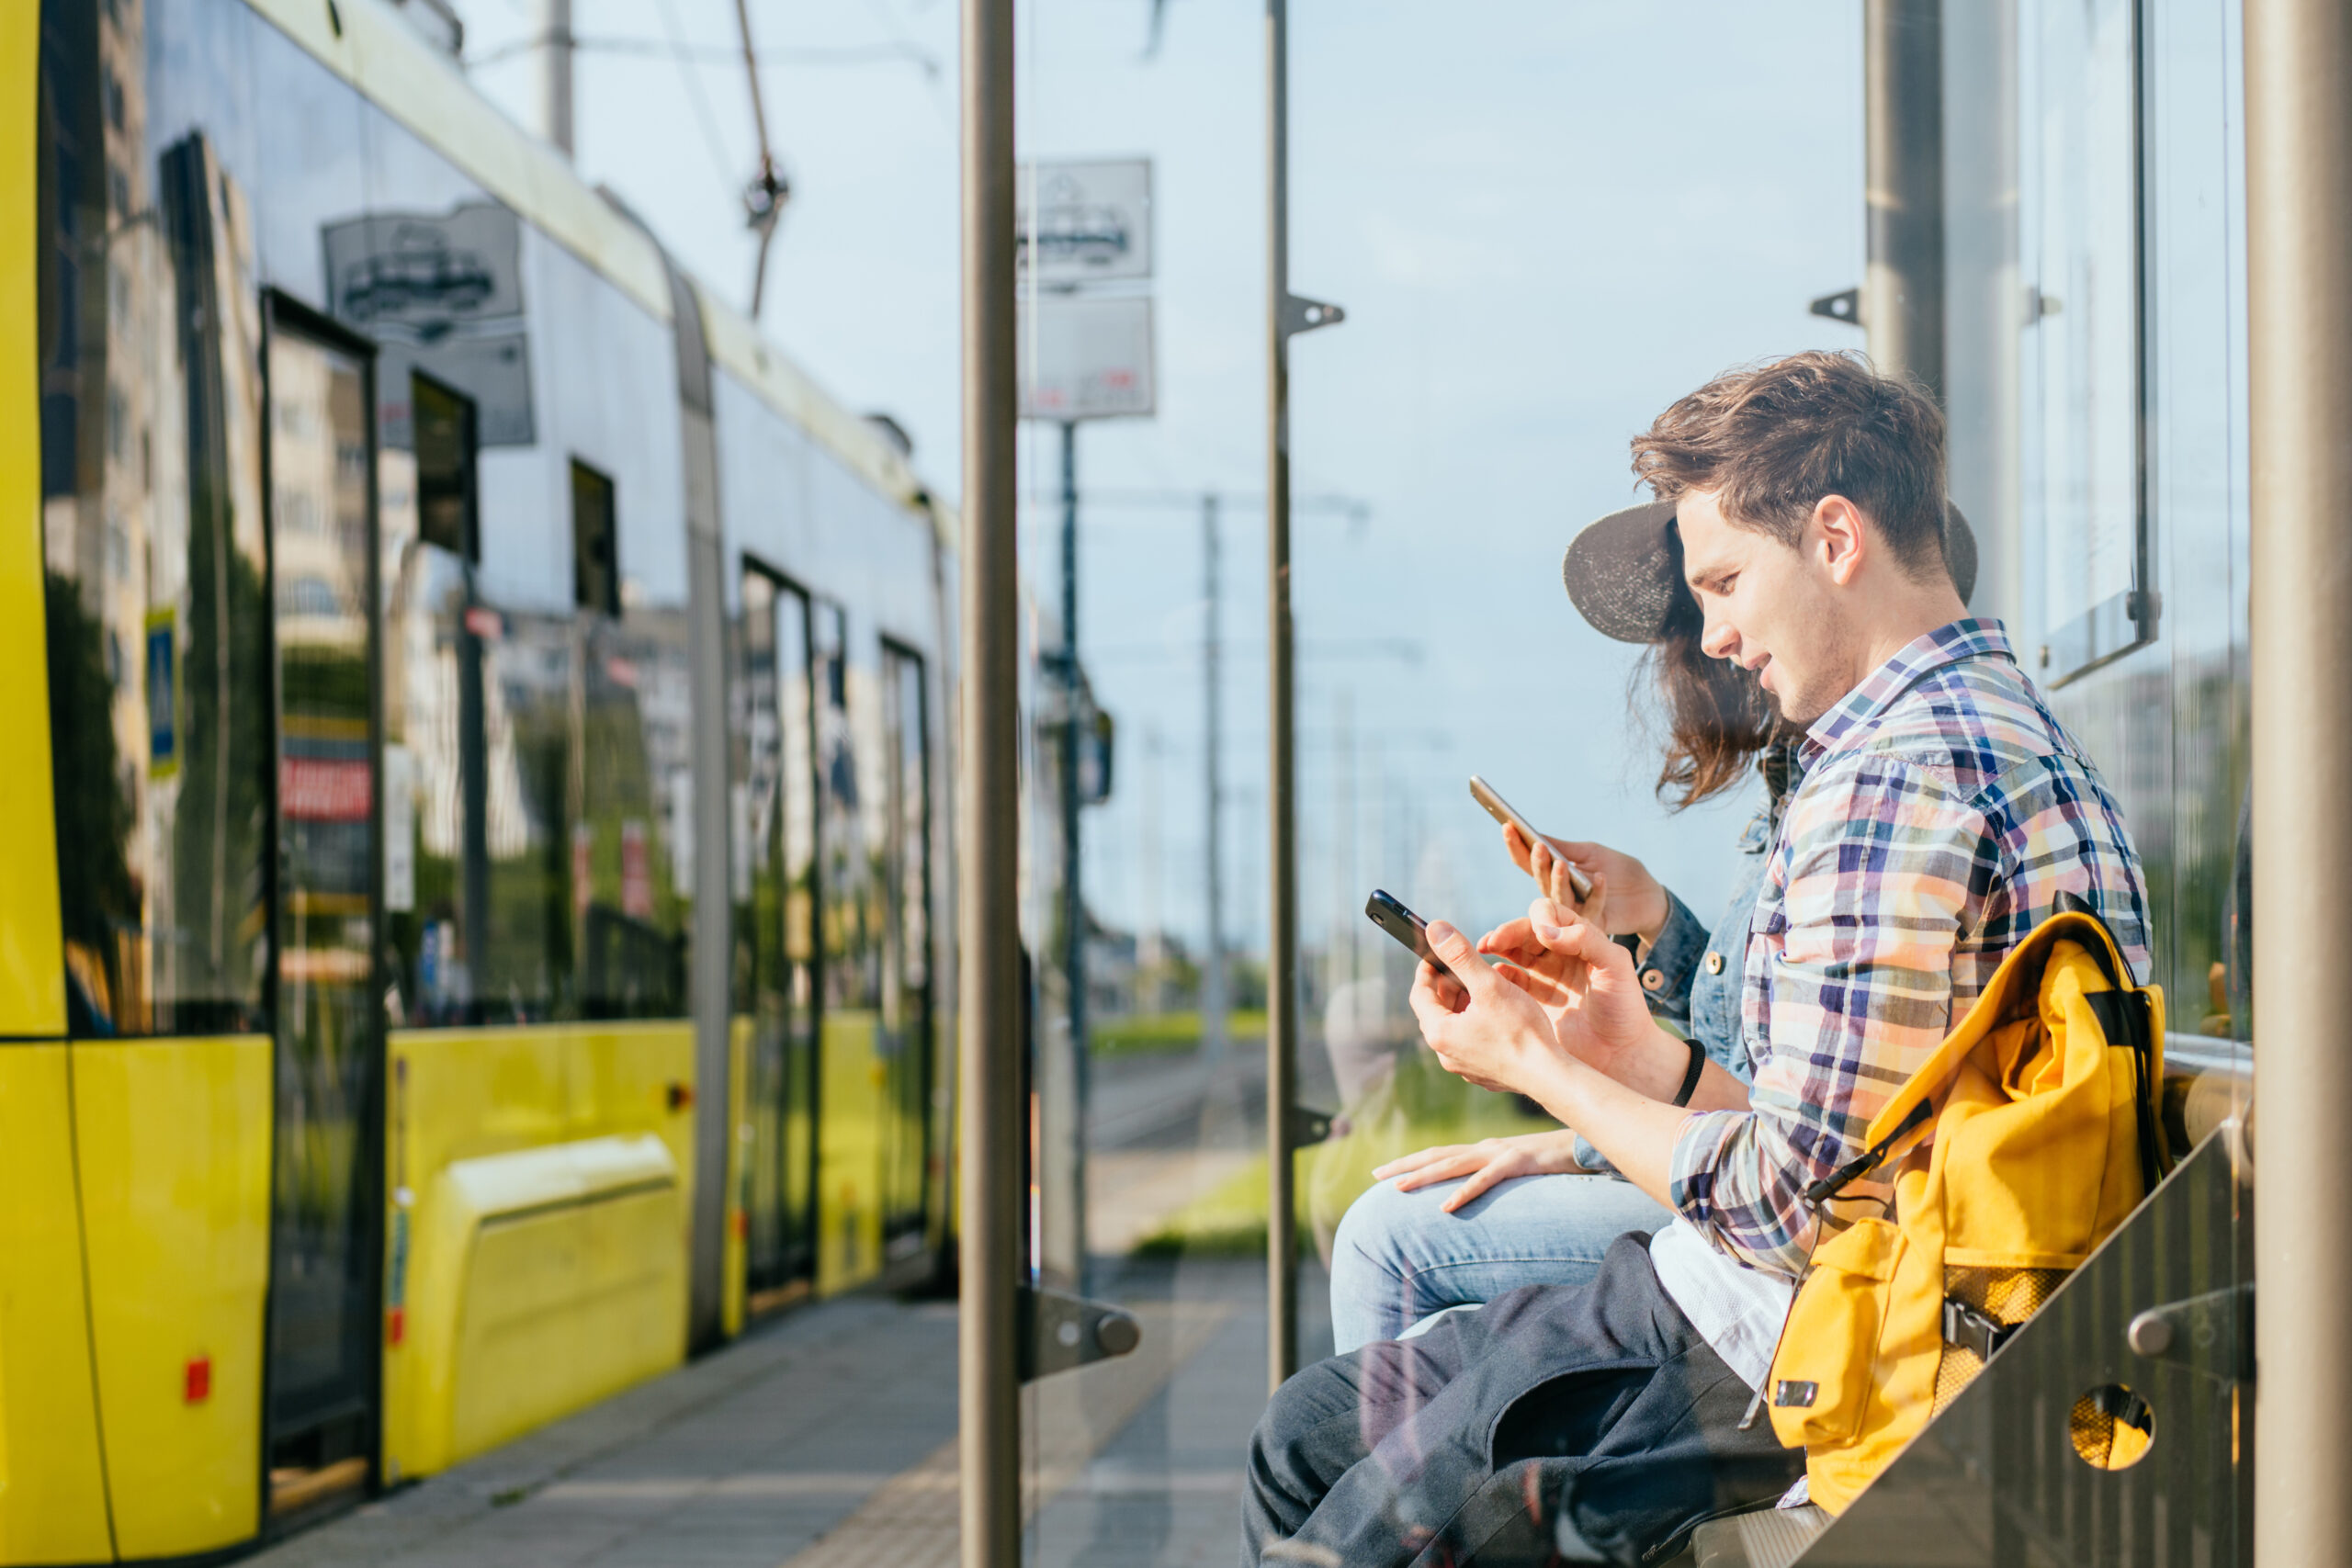 How does IP4MaaS promote Mobility as a Service? Interview with Shift2Rail’s Gorazd Marinic